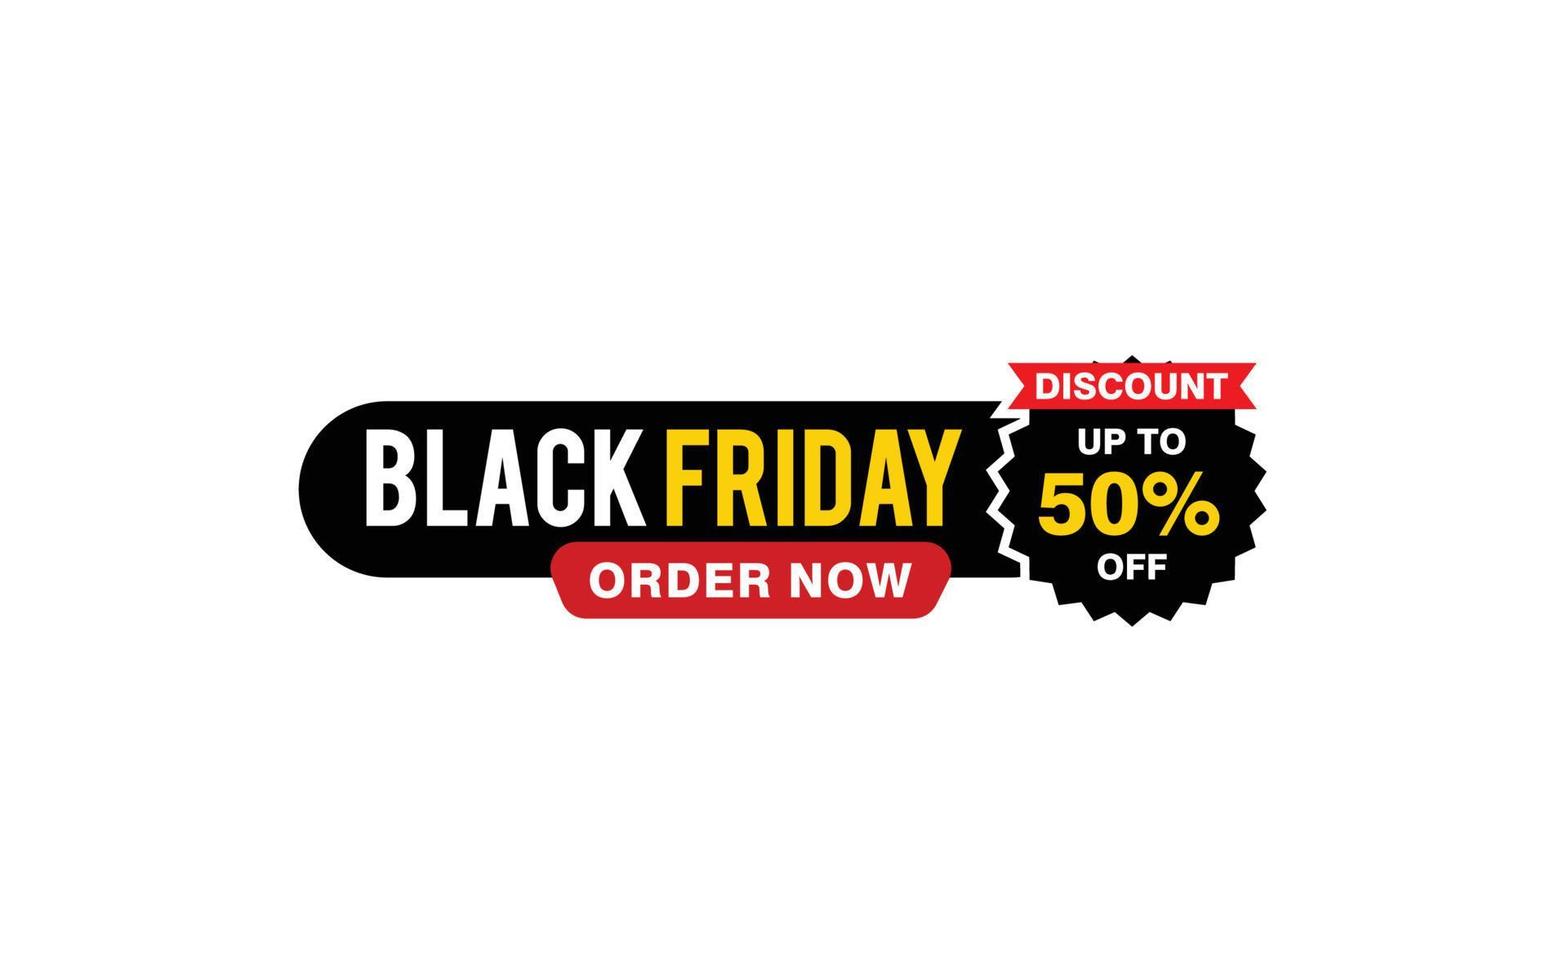 50 Percent discount black friday offer, clearance, promotion banner layout with sticker style. vector